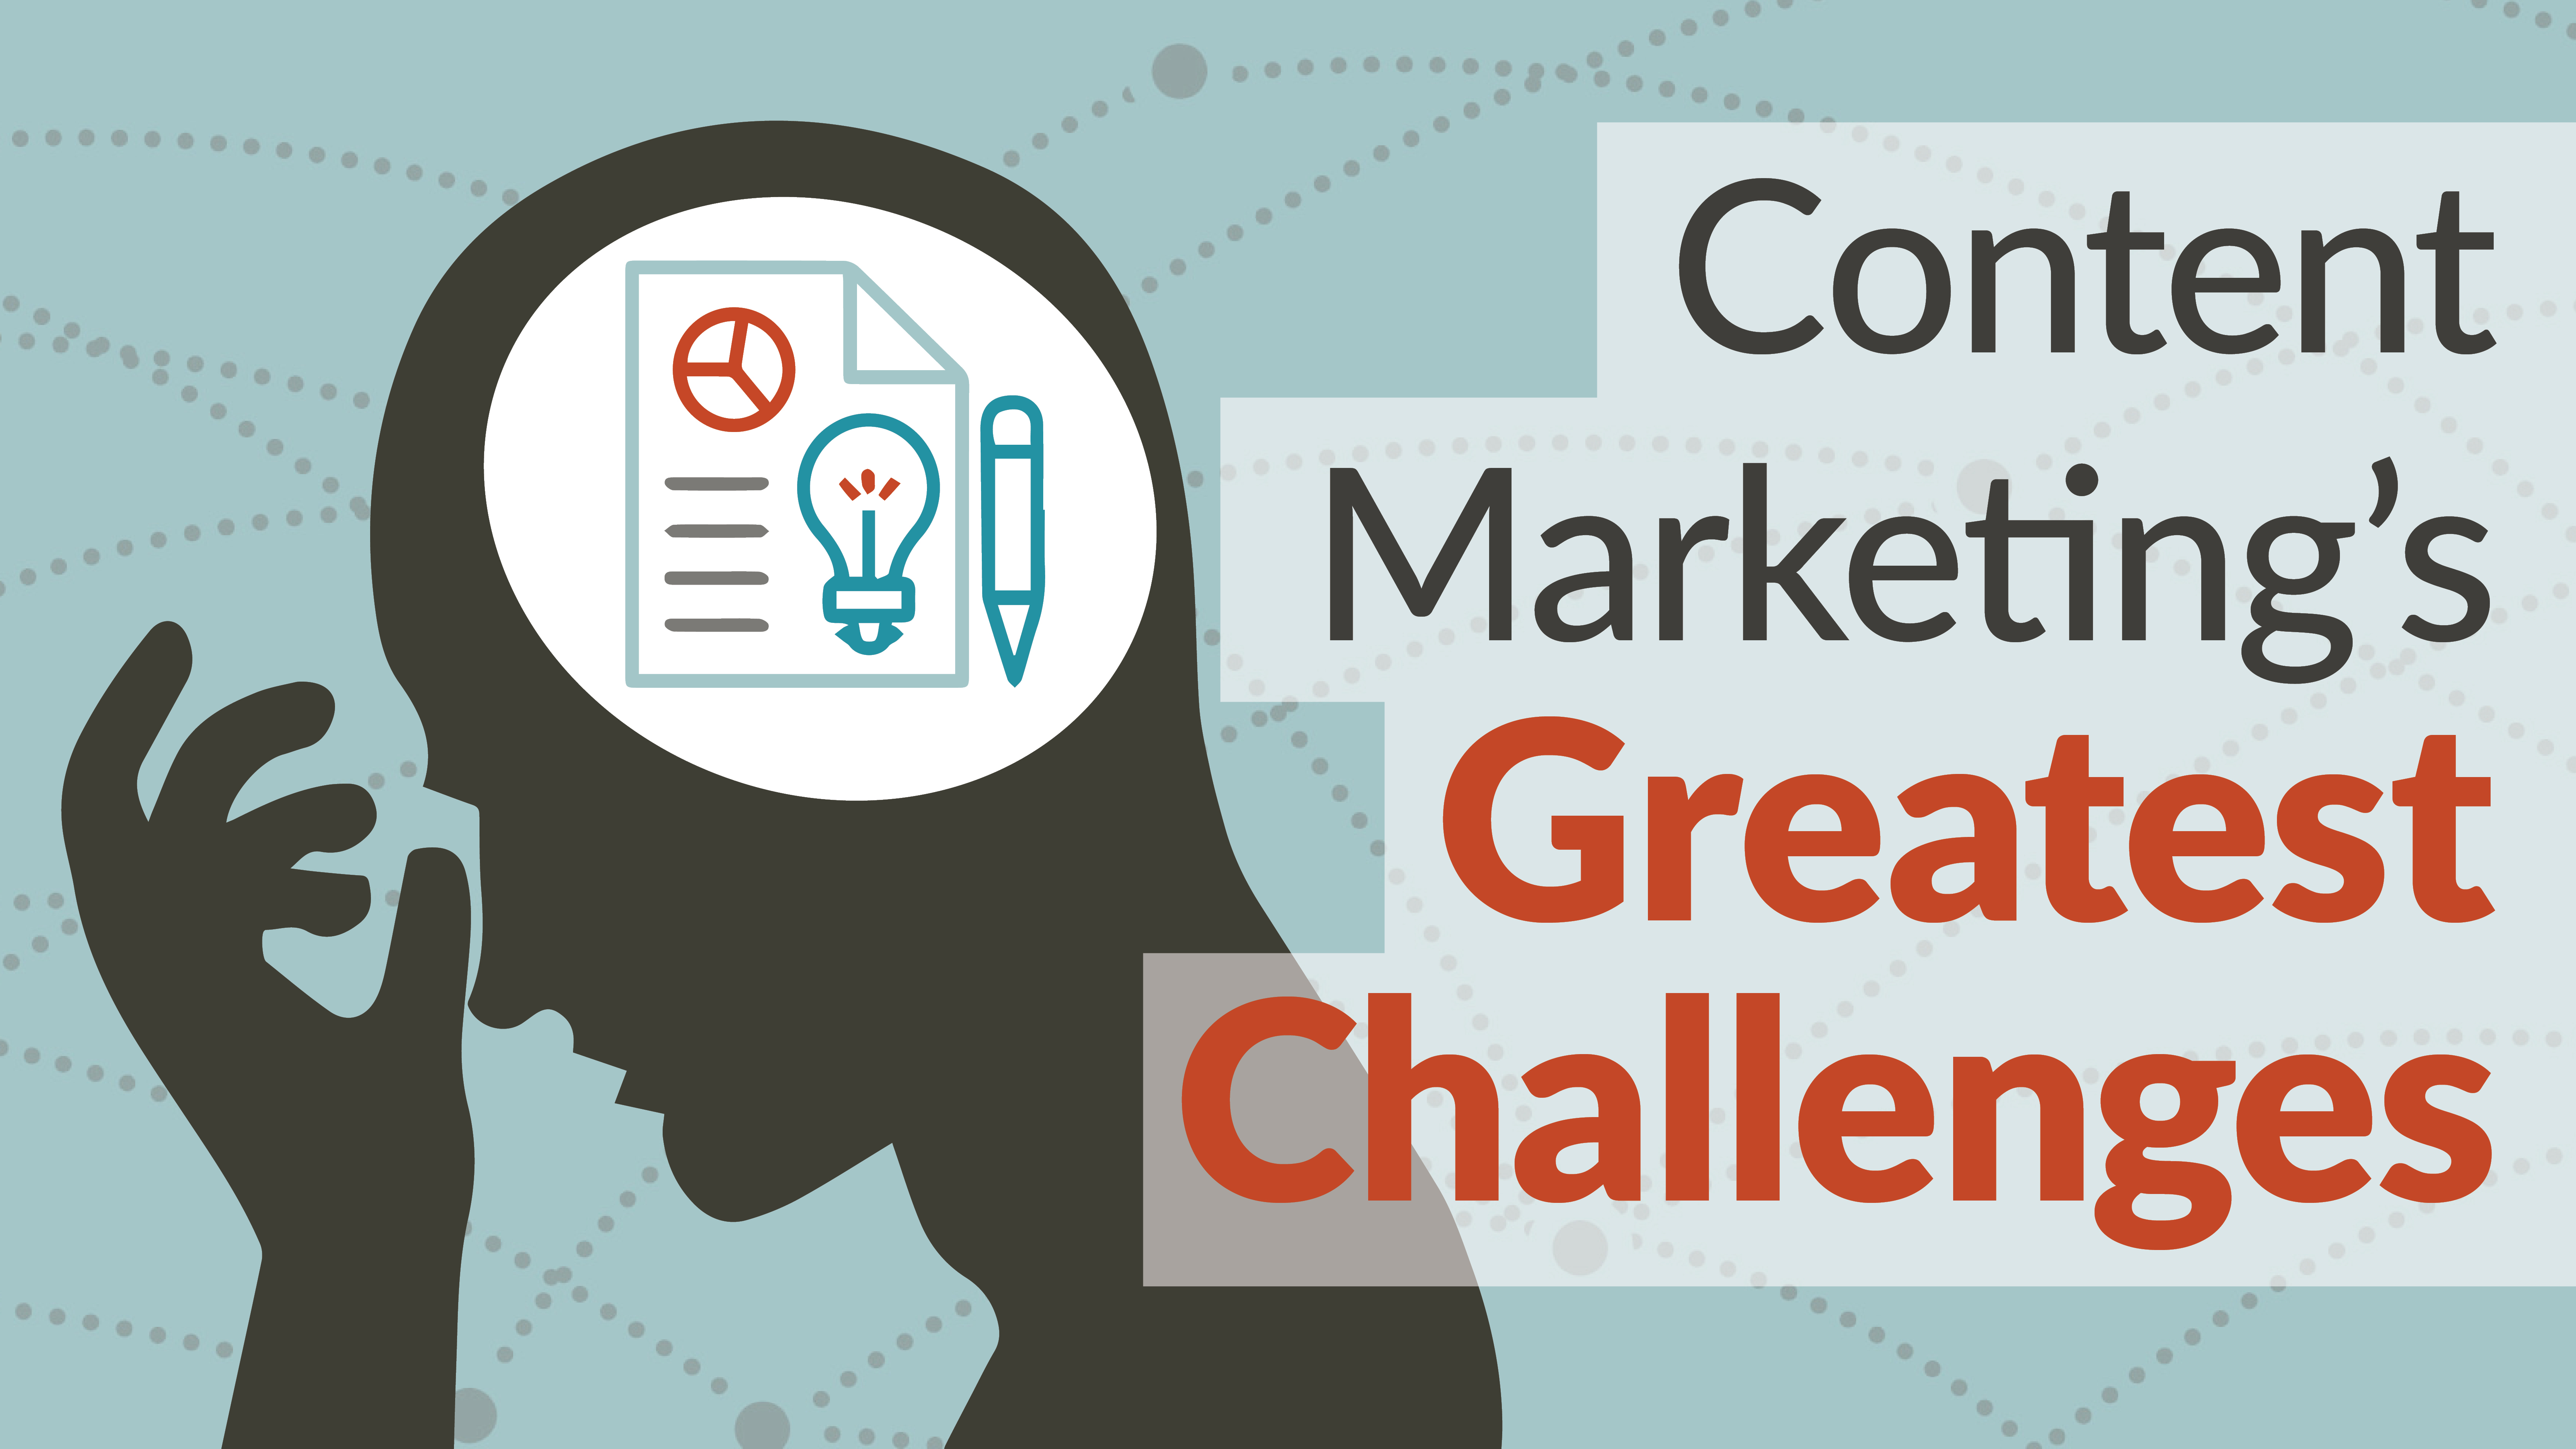 Which Content Marketing Challenge Do You Need Help Conquering?